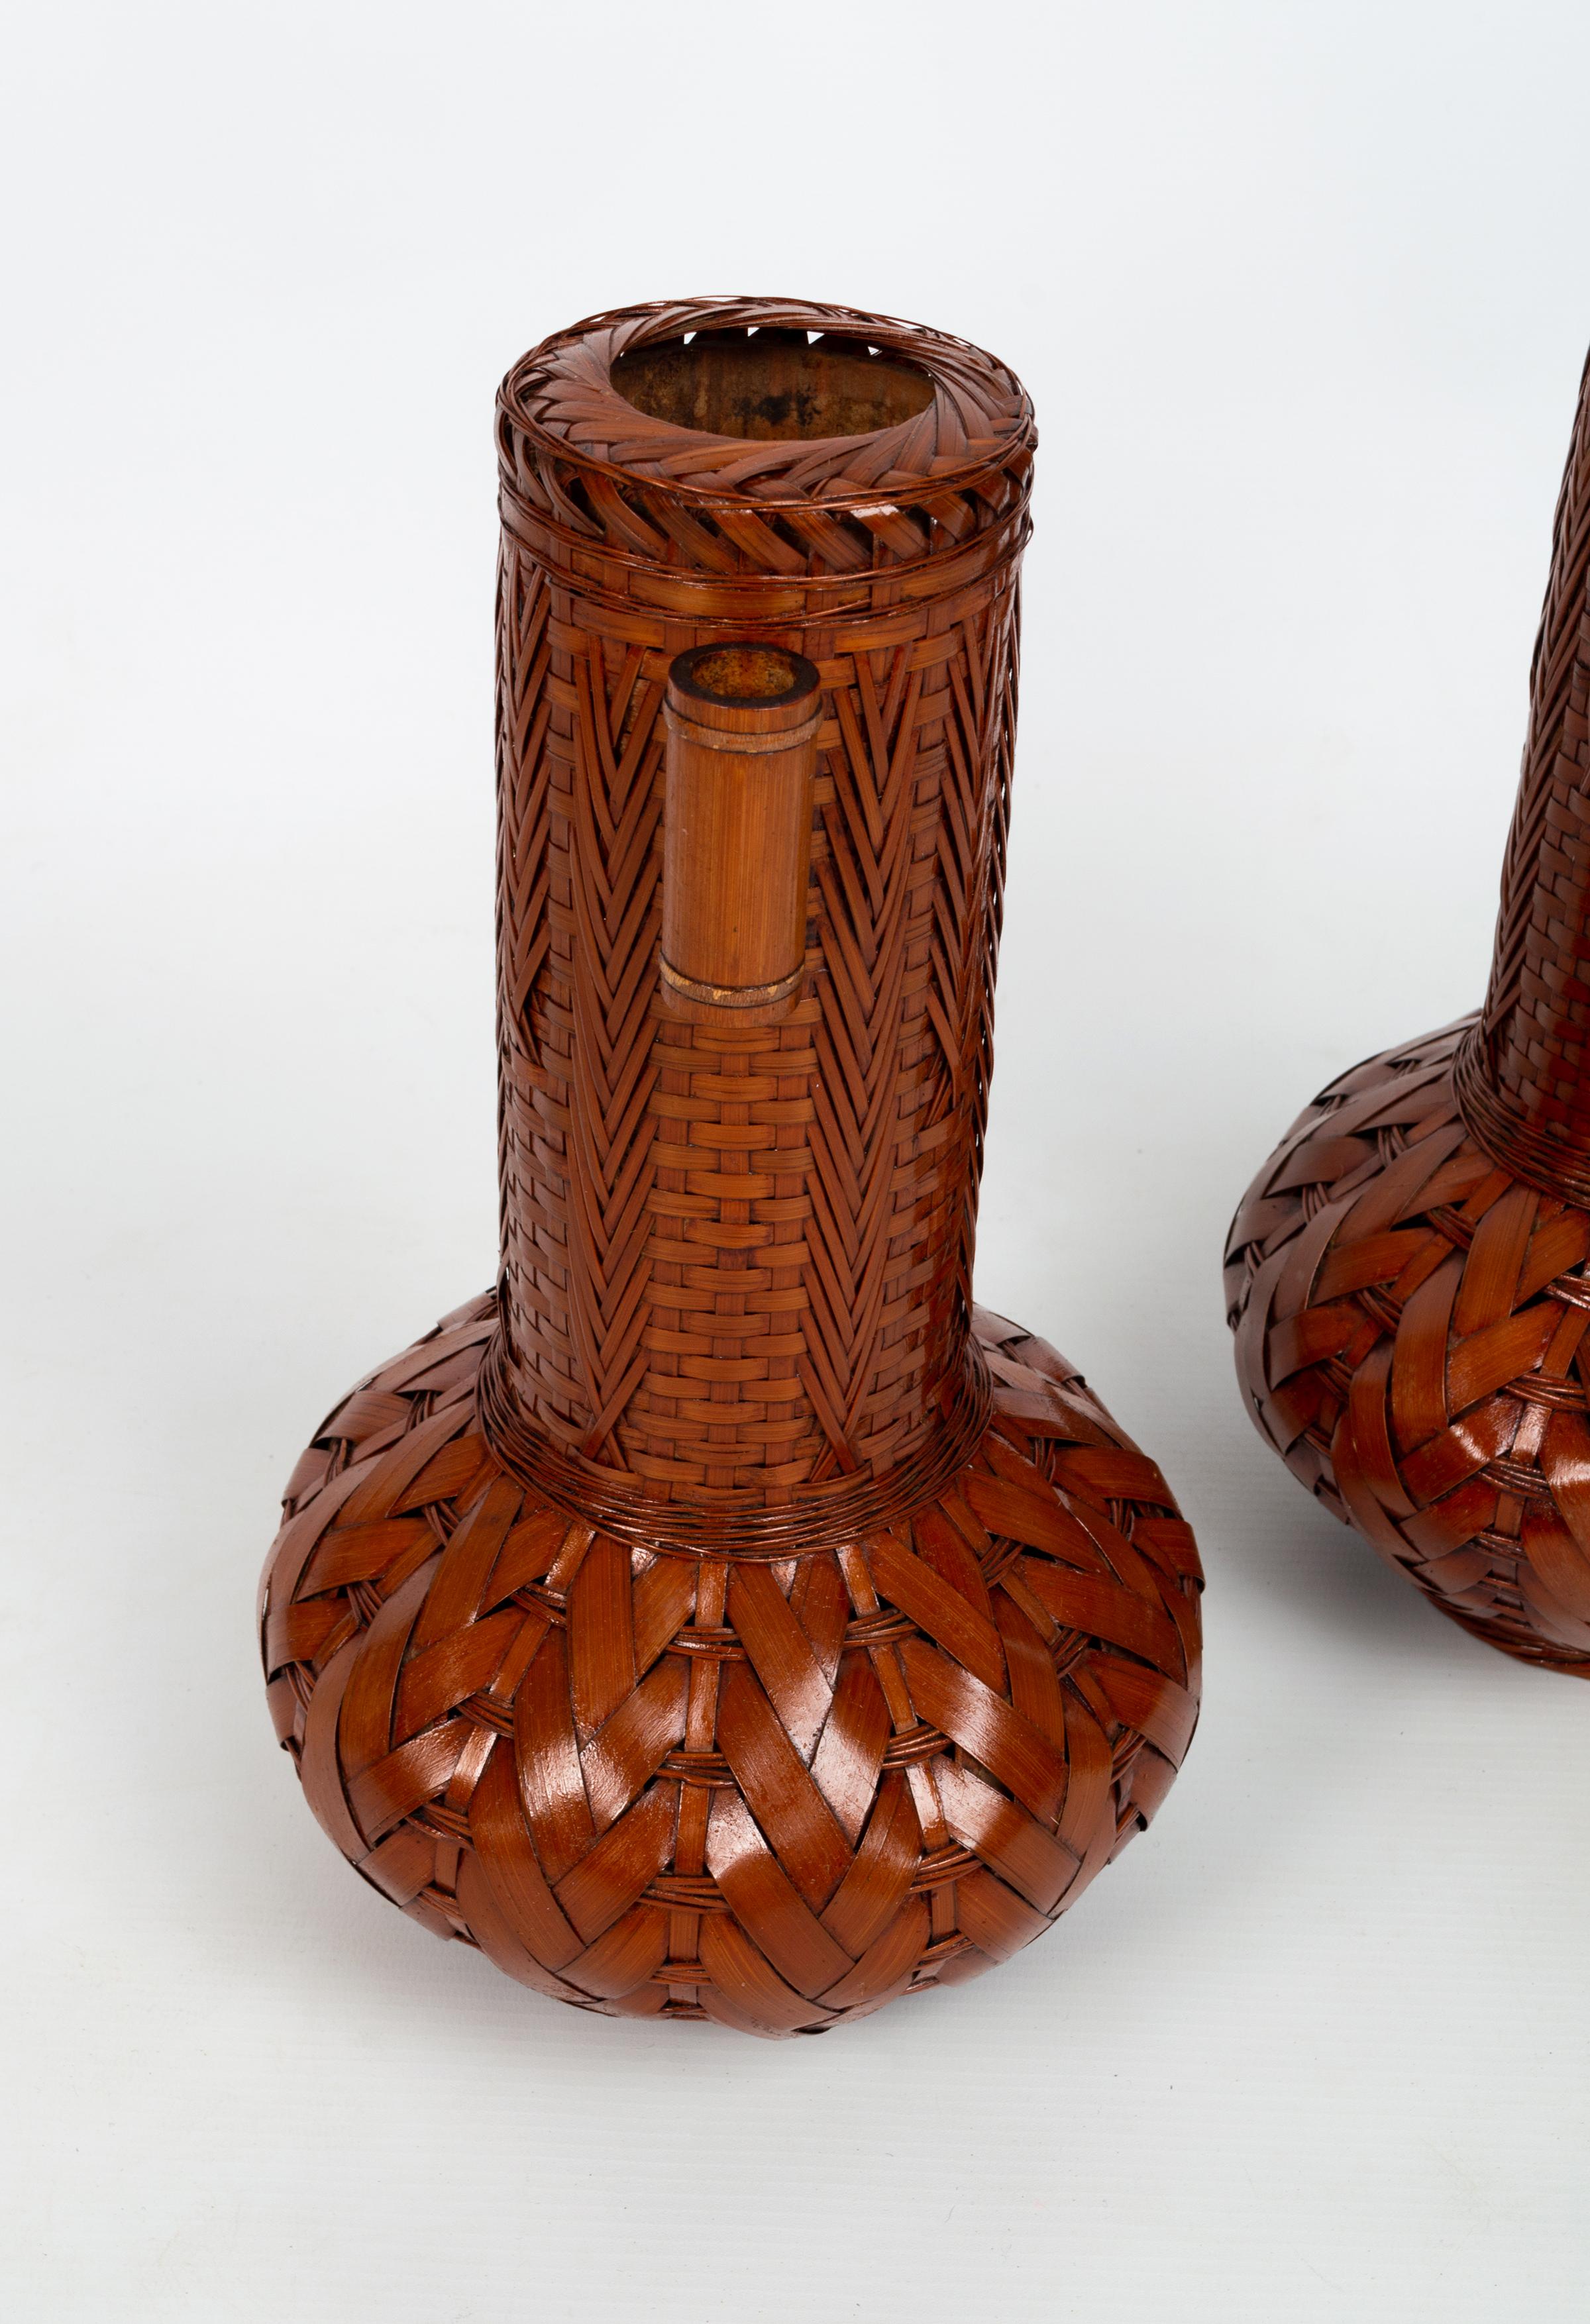 Showa Pair Japanese Lacquered Woven Bamboo Ikebana Vases, Japan, C.1950 For Sale